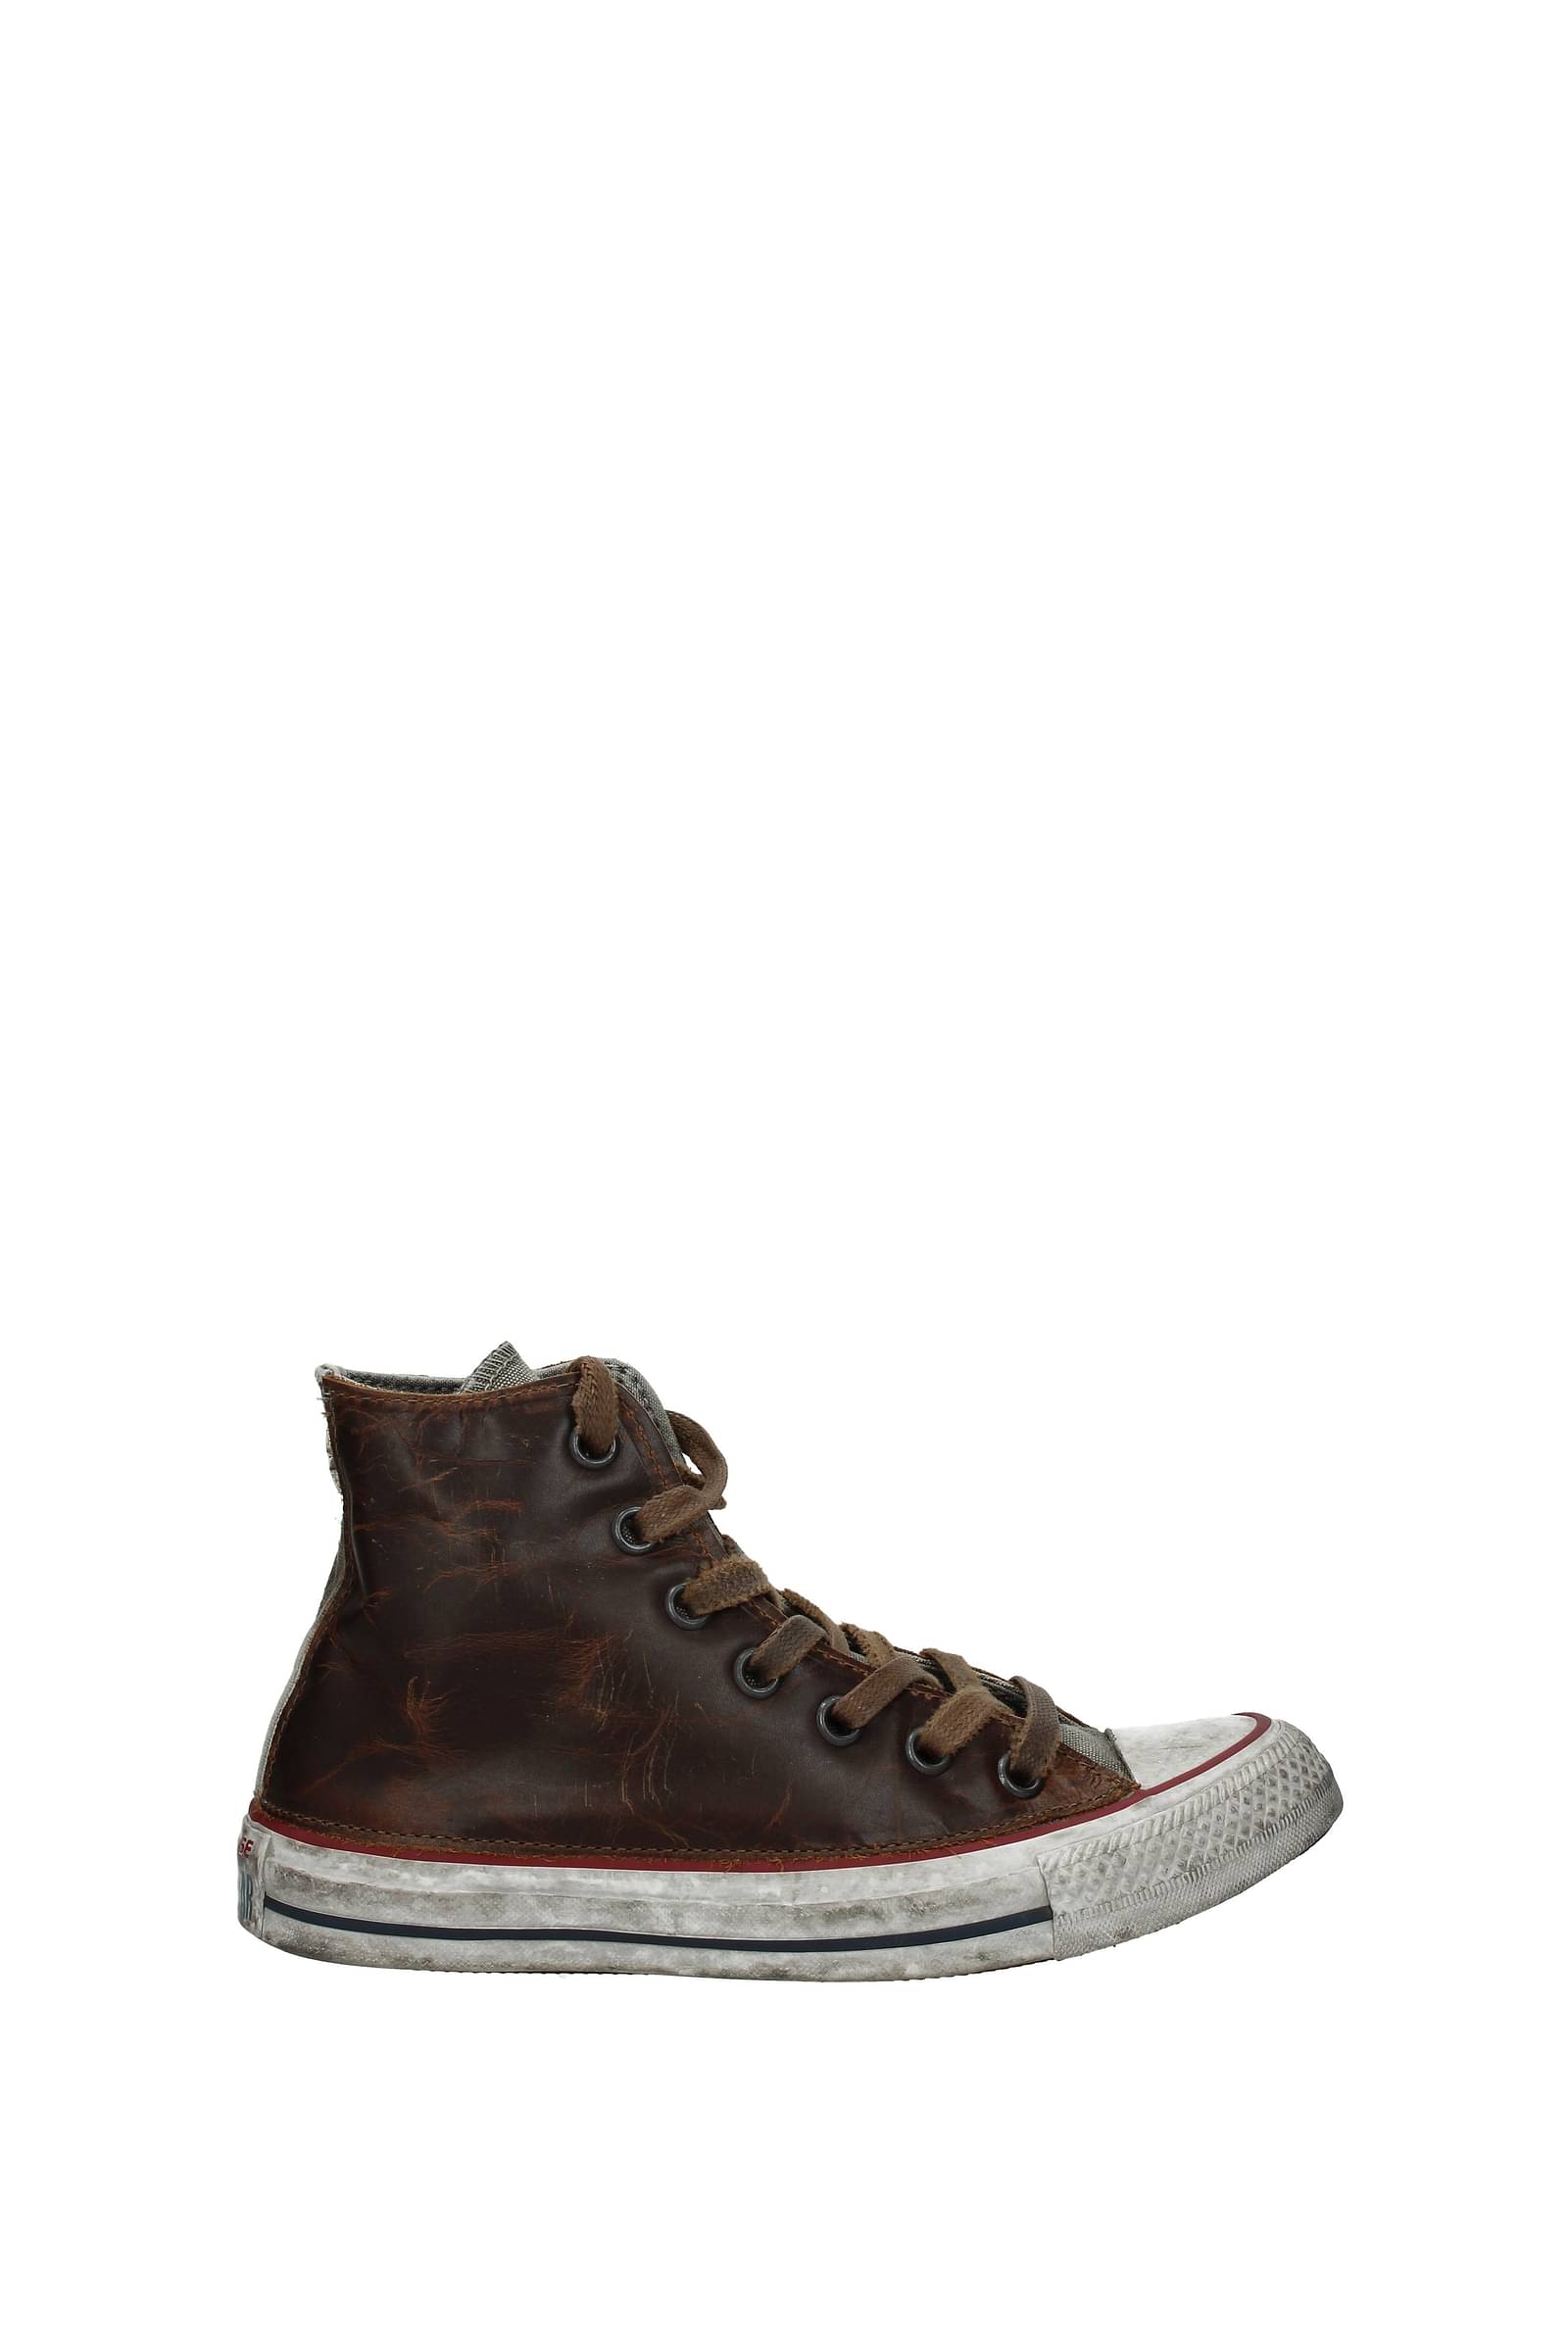 converse bianche basse outlet 88